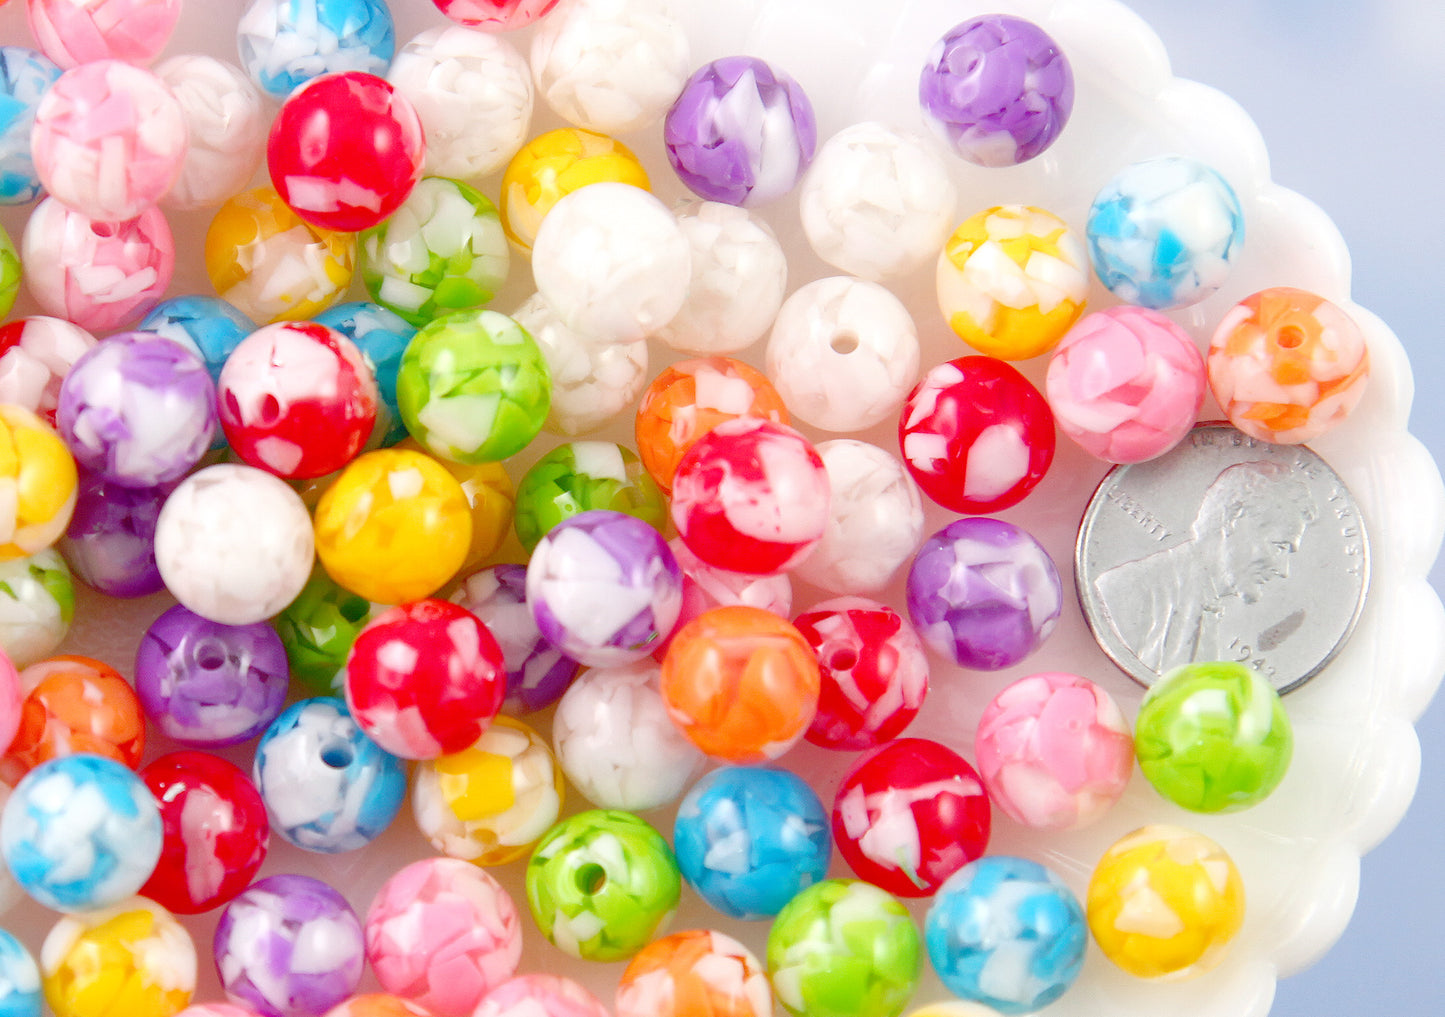 Cute Resin Beads - 10mm Colorful Tapioca Jelly Candy Marble Acrylic or Resin Beads - mixed color, small size beads - 56 pcs set